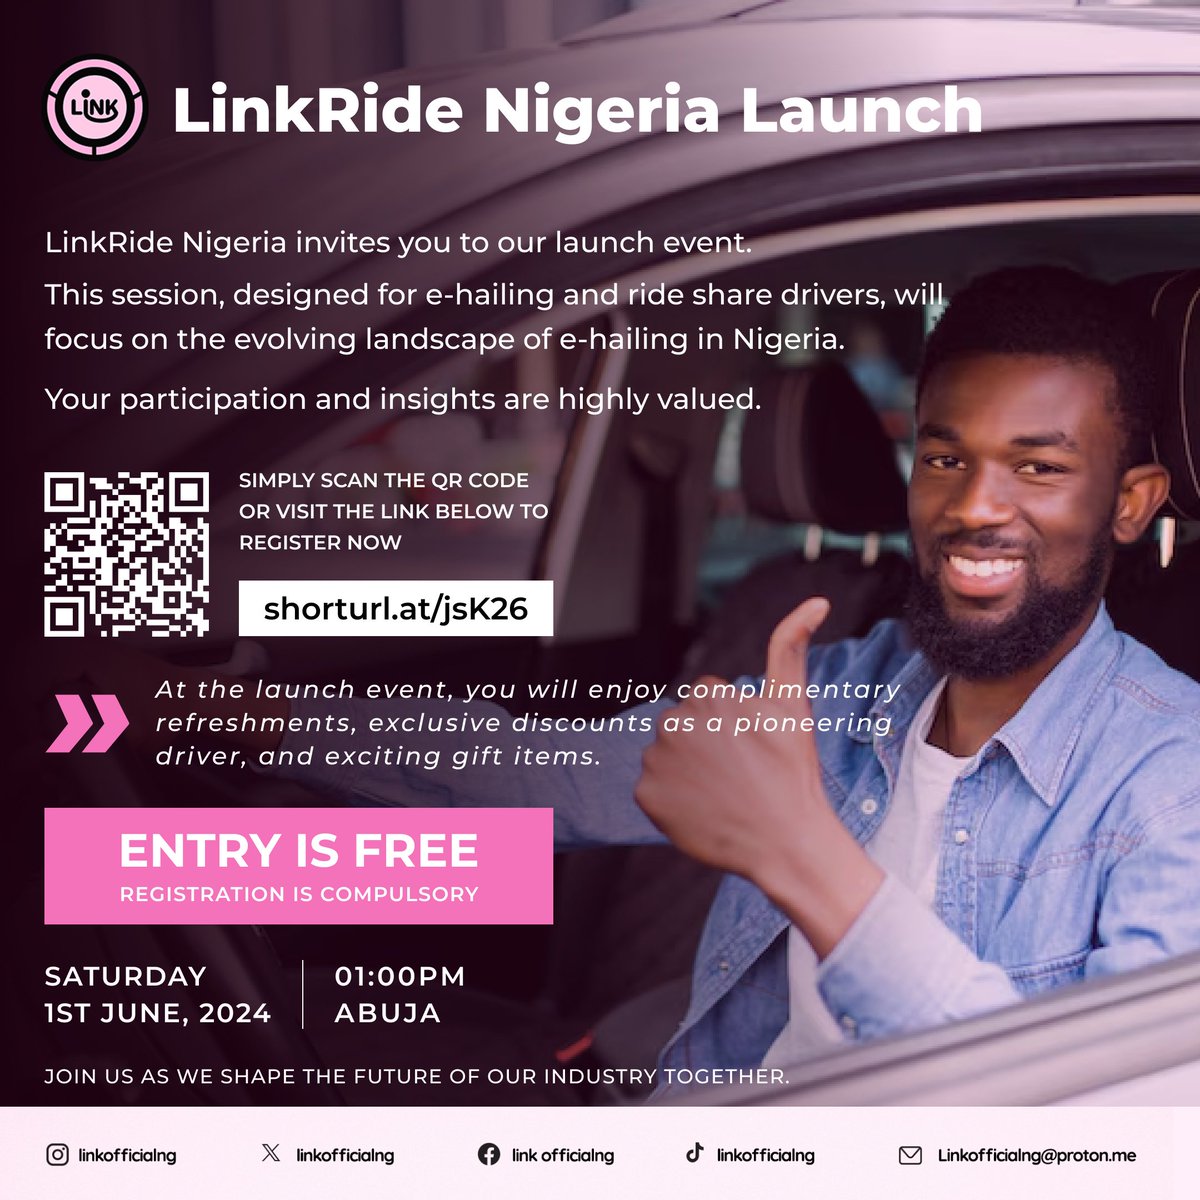 Get ready to ride with LinkRide! Join us at our launch event in Abuja on June 1st! Entry is FREE but registration is a MUST! At the event, #drivers will get exclusive discounts on commission, amazing gift items, refreshments and more surprises! bit.ly/LinkRideLaunch